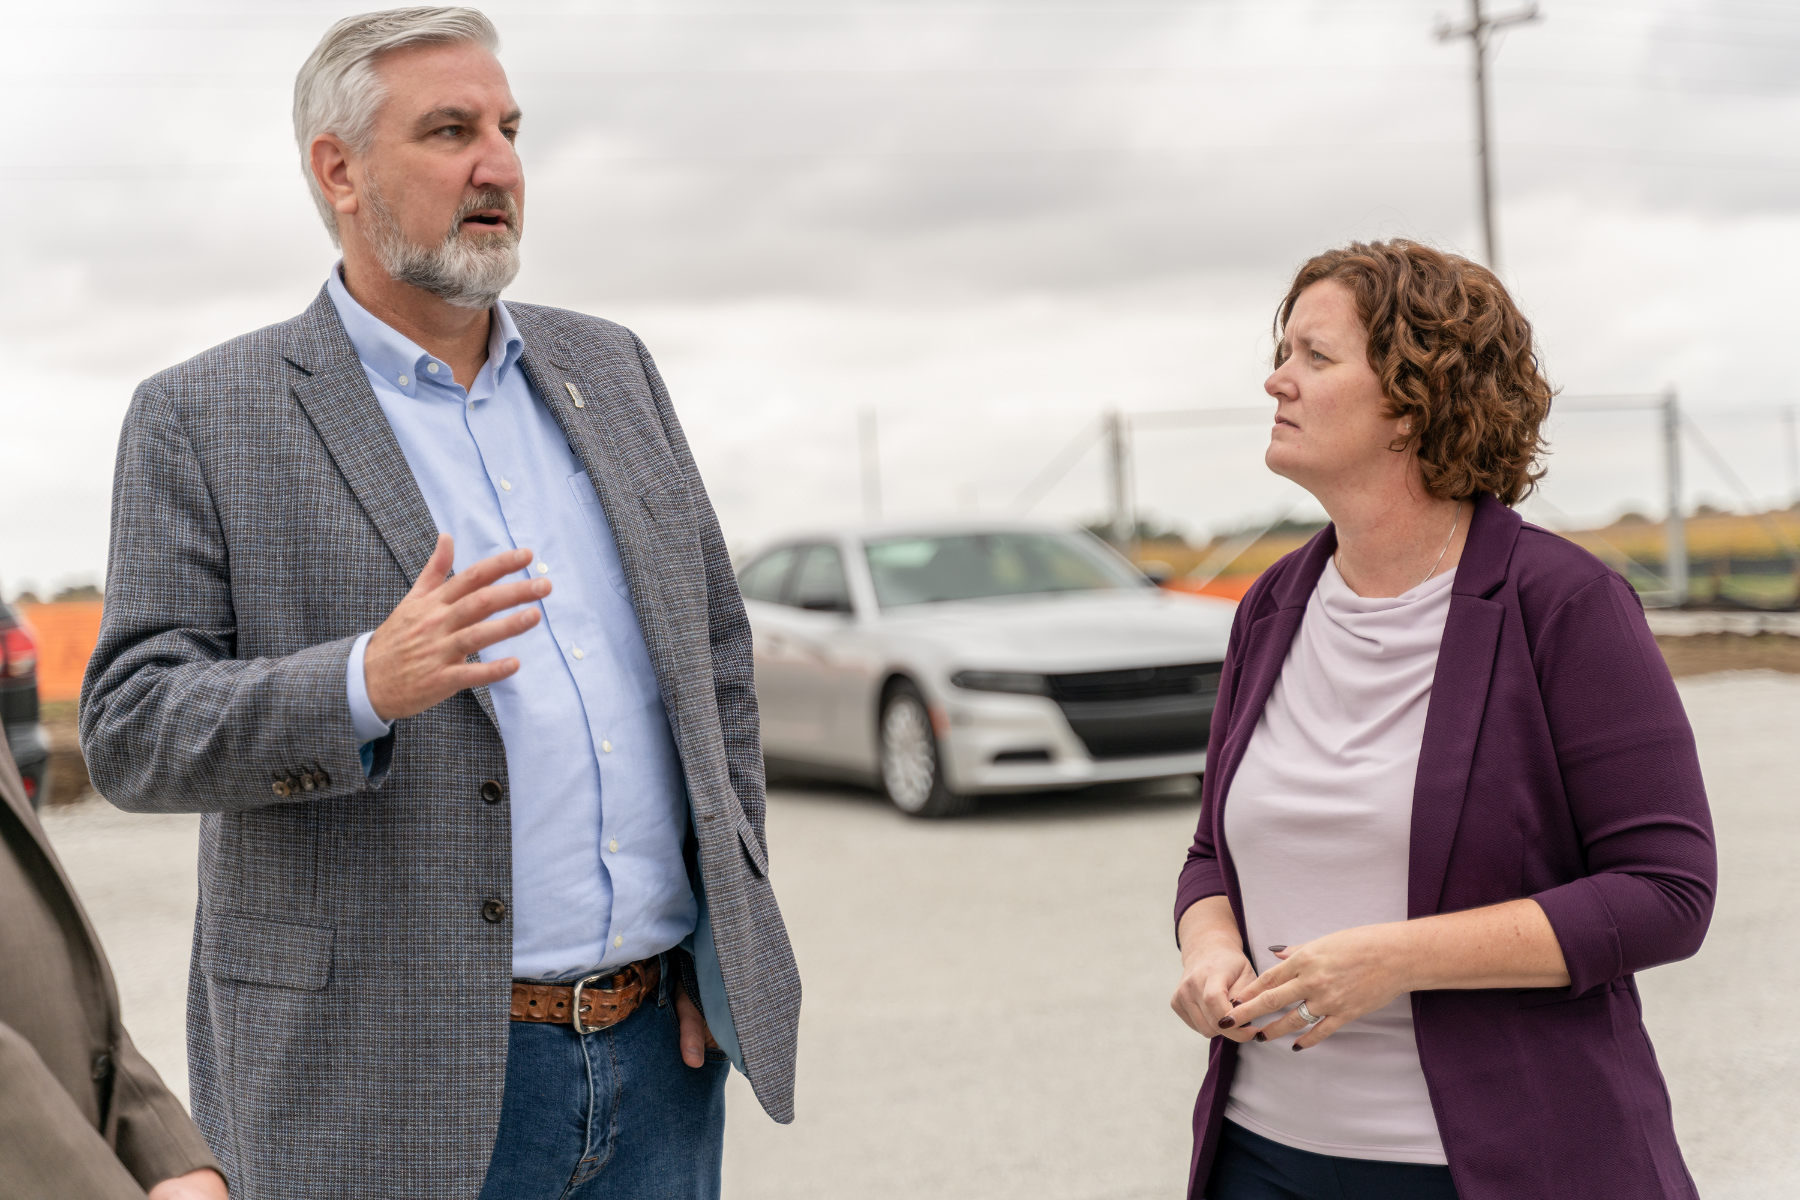 Governor Eric Holcomb speaks with IDOC Commissioner Christina Reagle on Thursday, Sep. 28, 2023 before a groundbreaking for the new $1.2 Billion correctional facility under construction in Westville, Indiana. SCOTT ROBERSON | Indiana Department of Correction